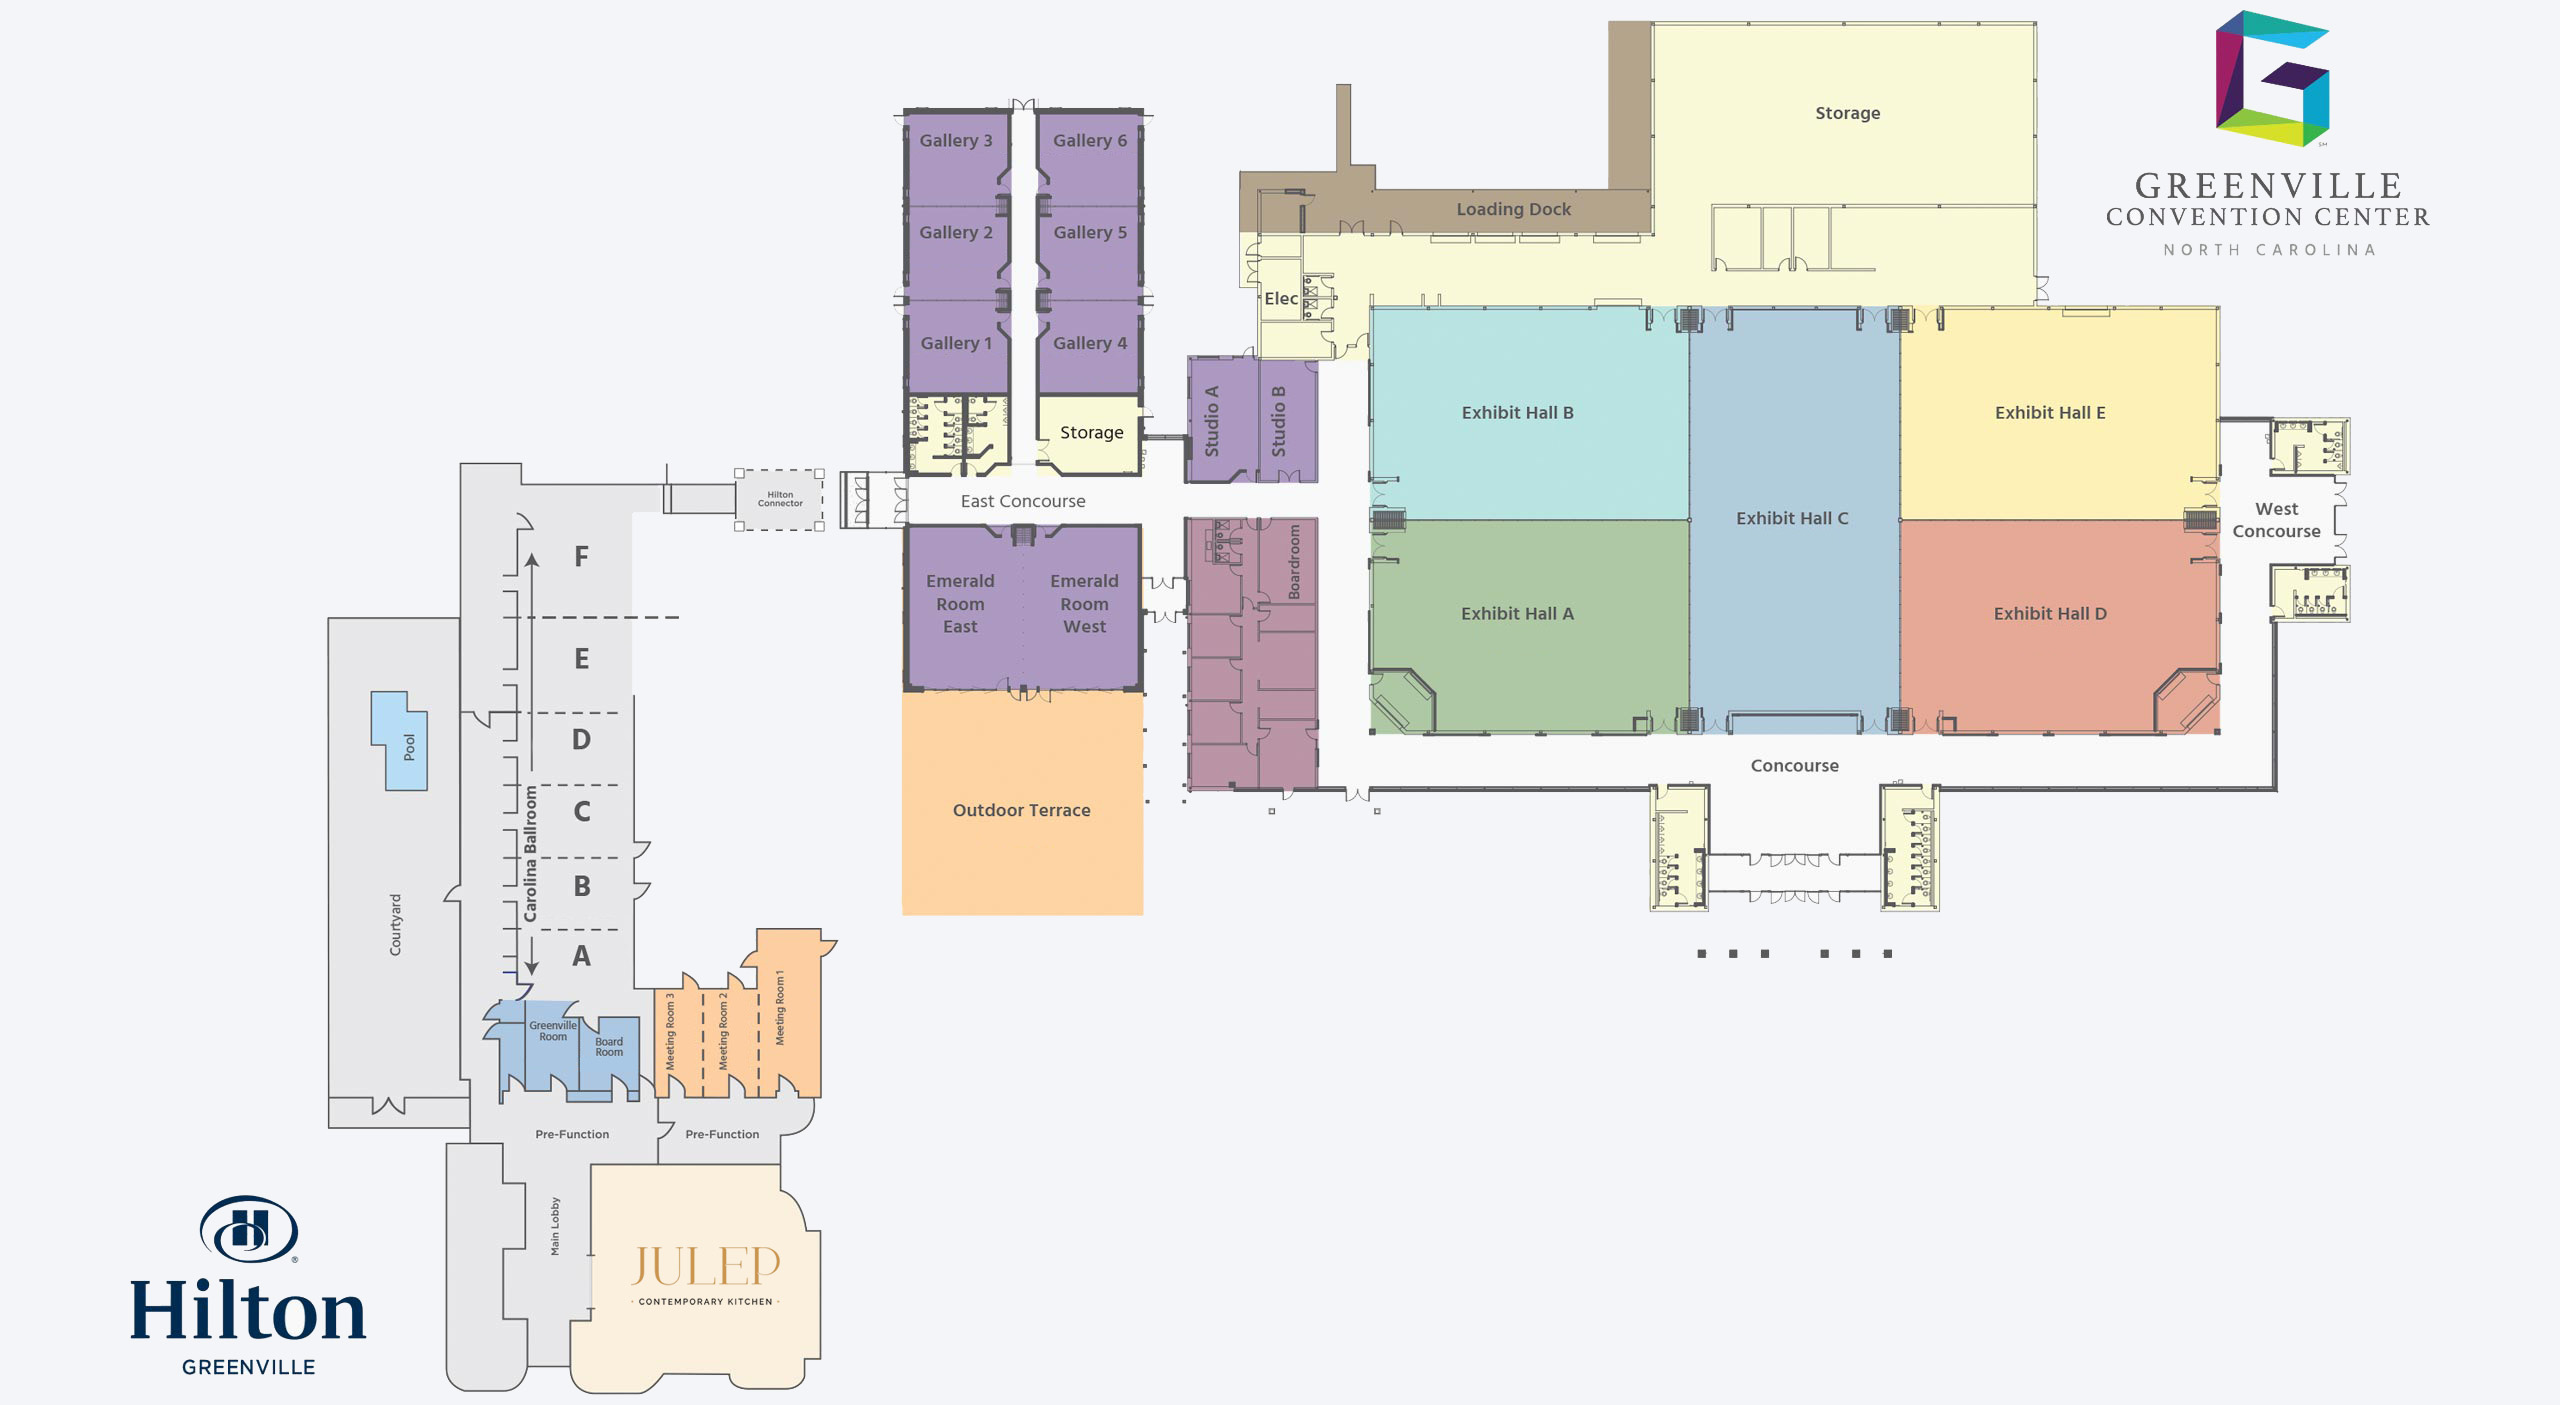 Floor plan of the Greenville Convention Center & Hilton